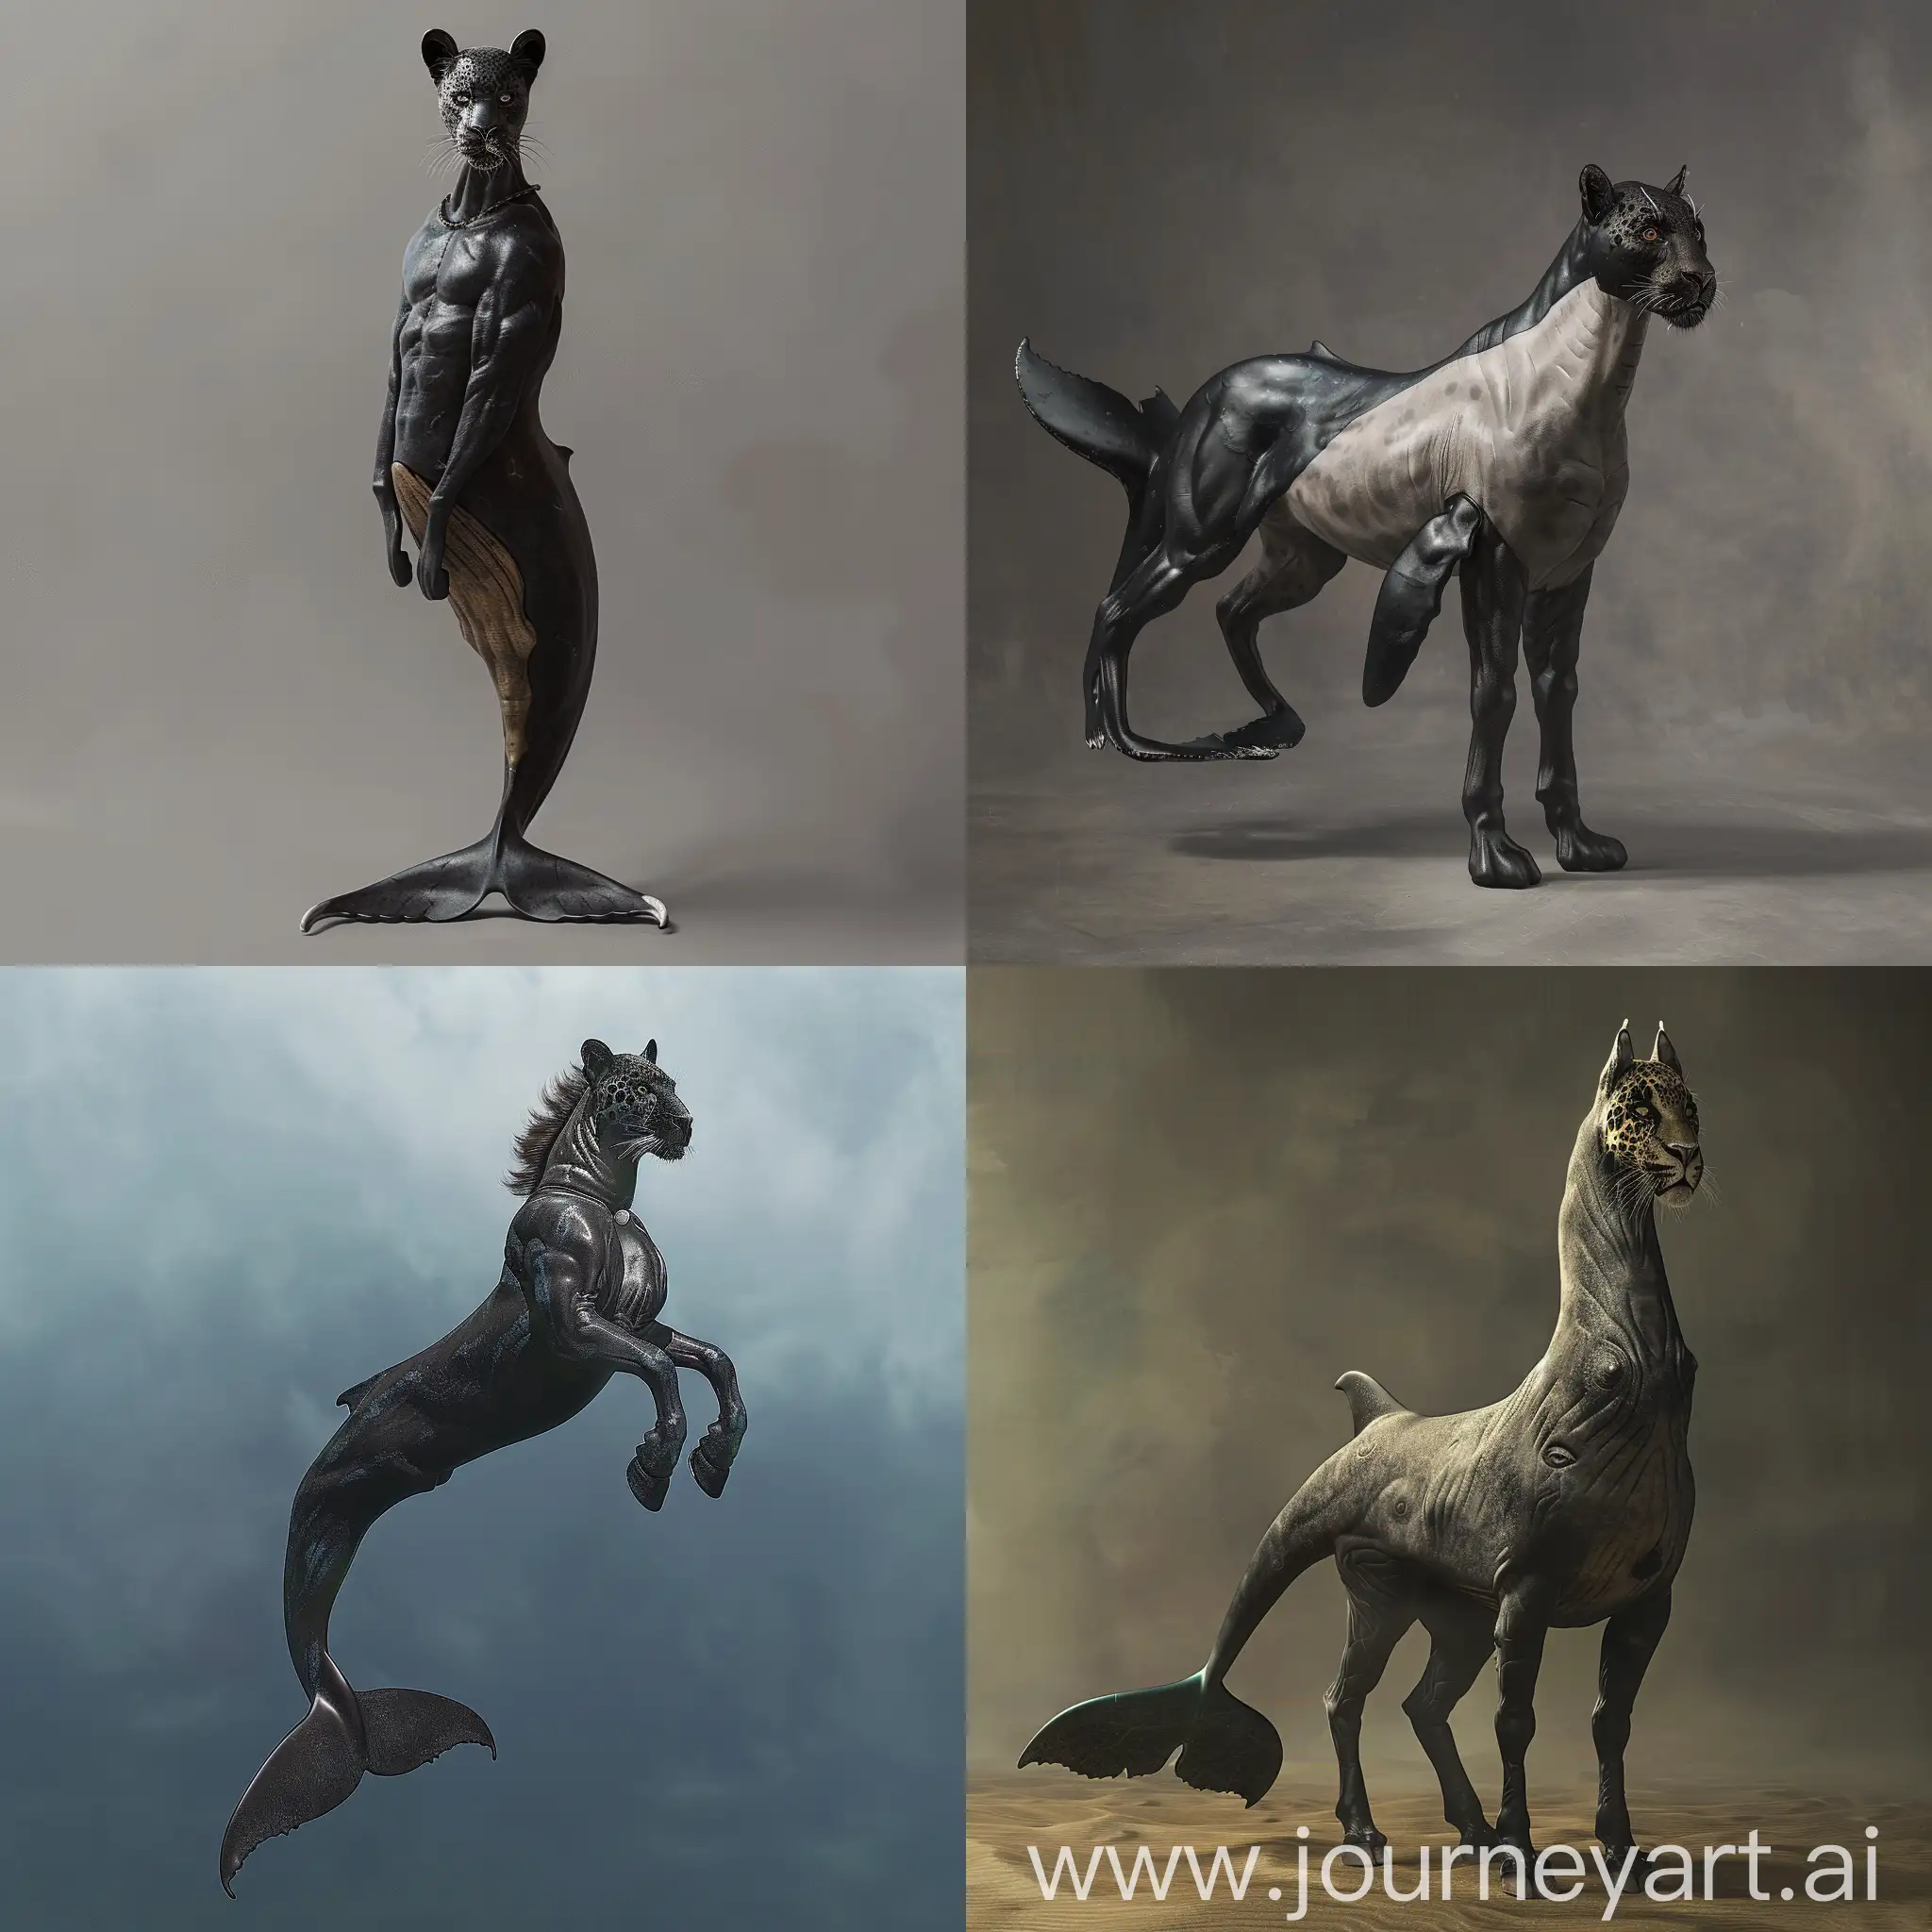 create a creature with sperm whale tail and body, horse front legs and breast and black panther head and neck